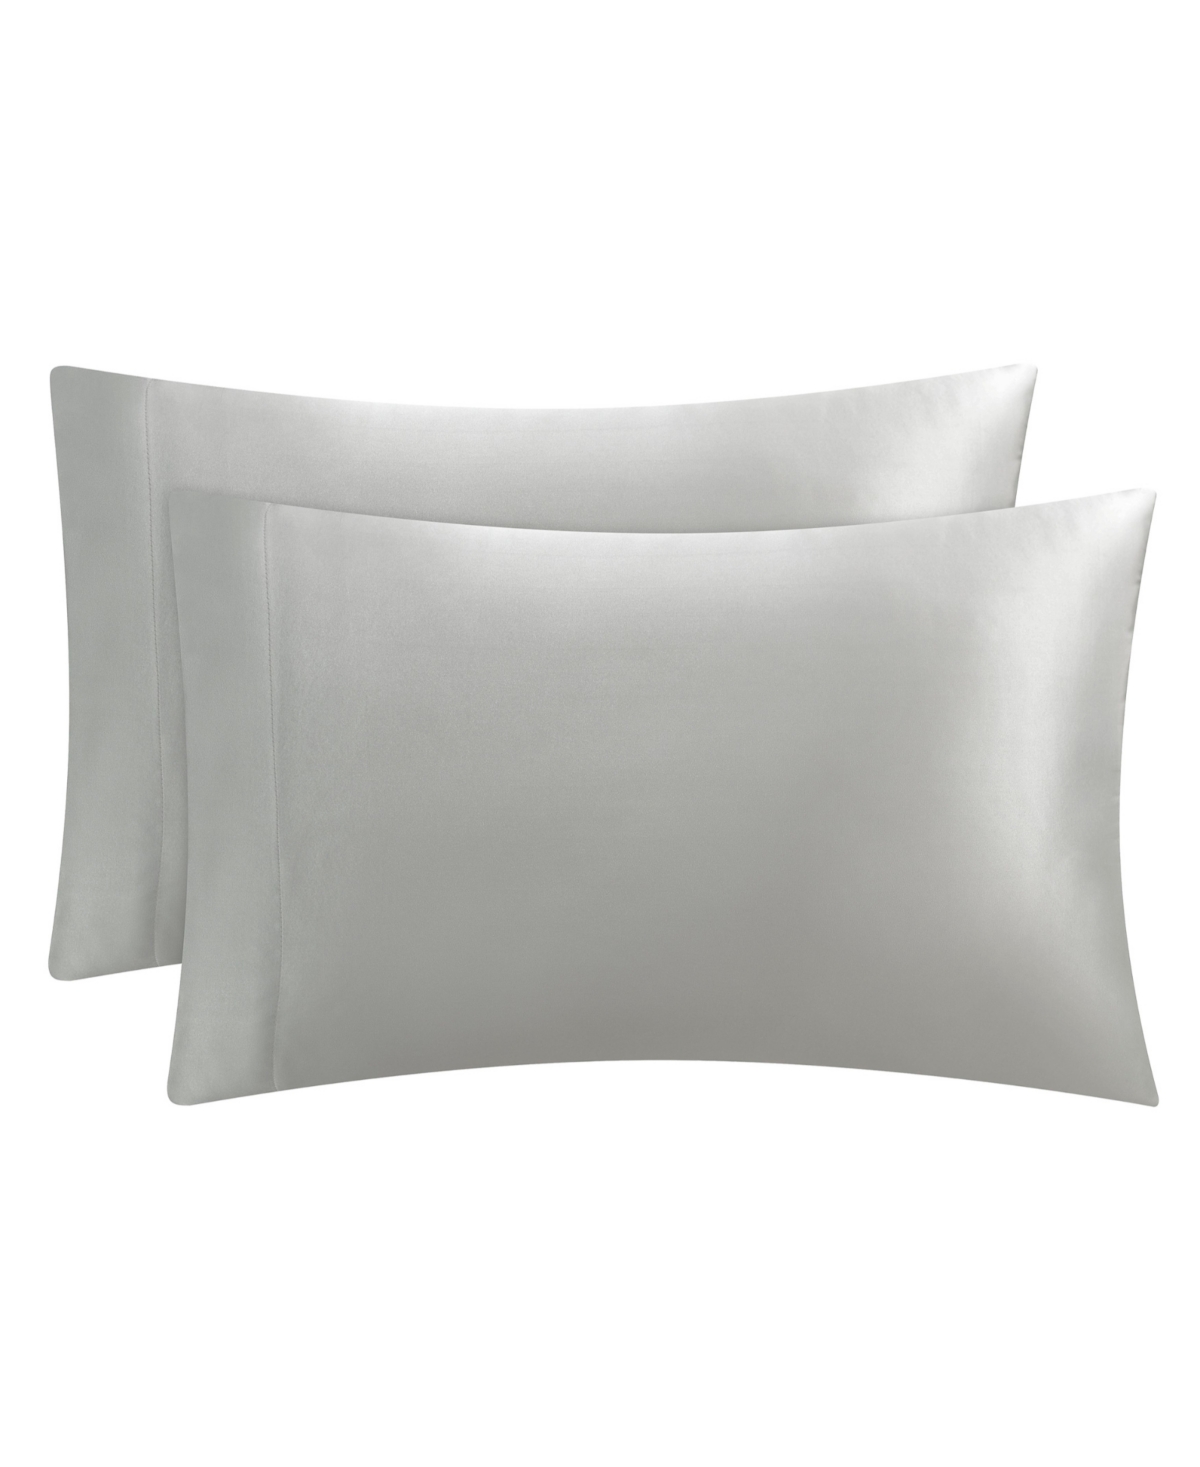 Juicy Couture Satin 2 Piece Pillow Case Set, King In Gray